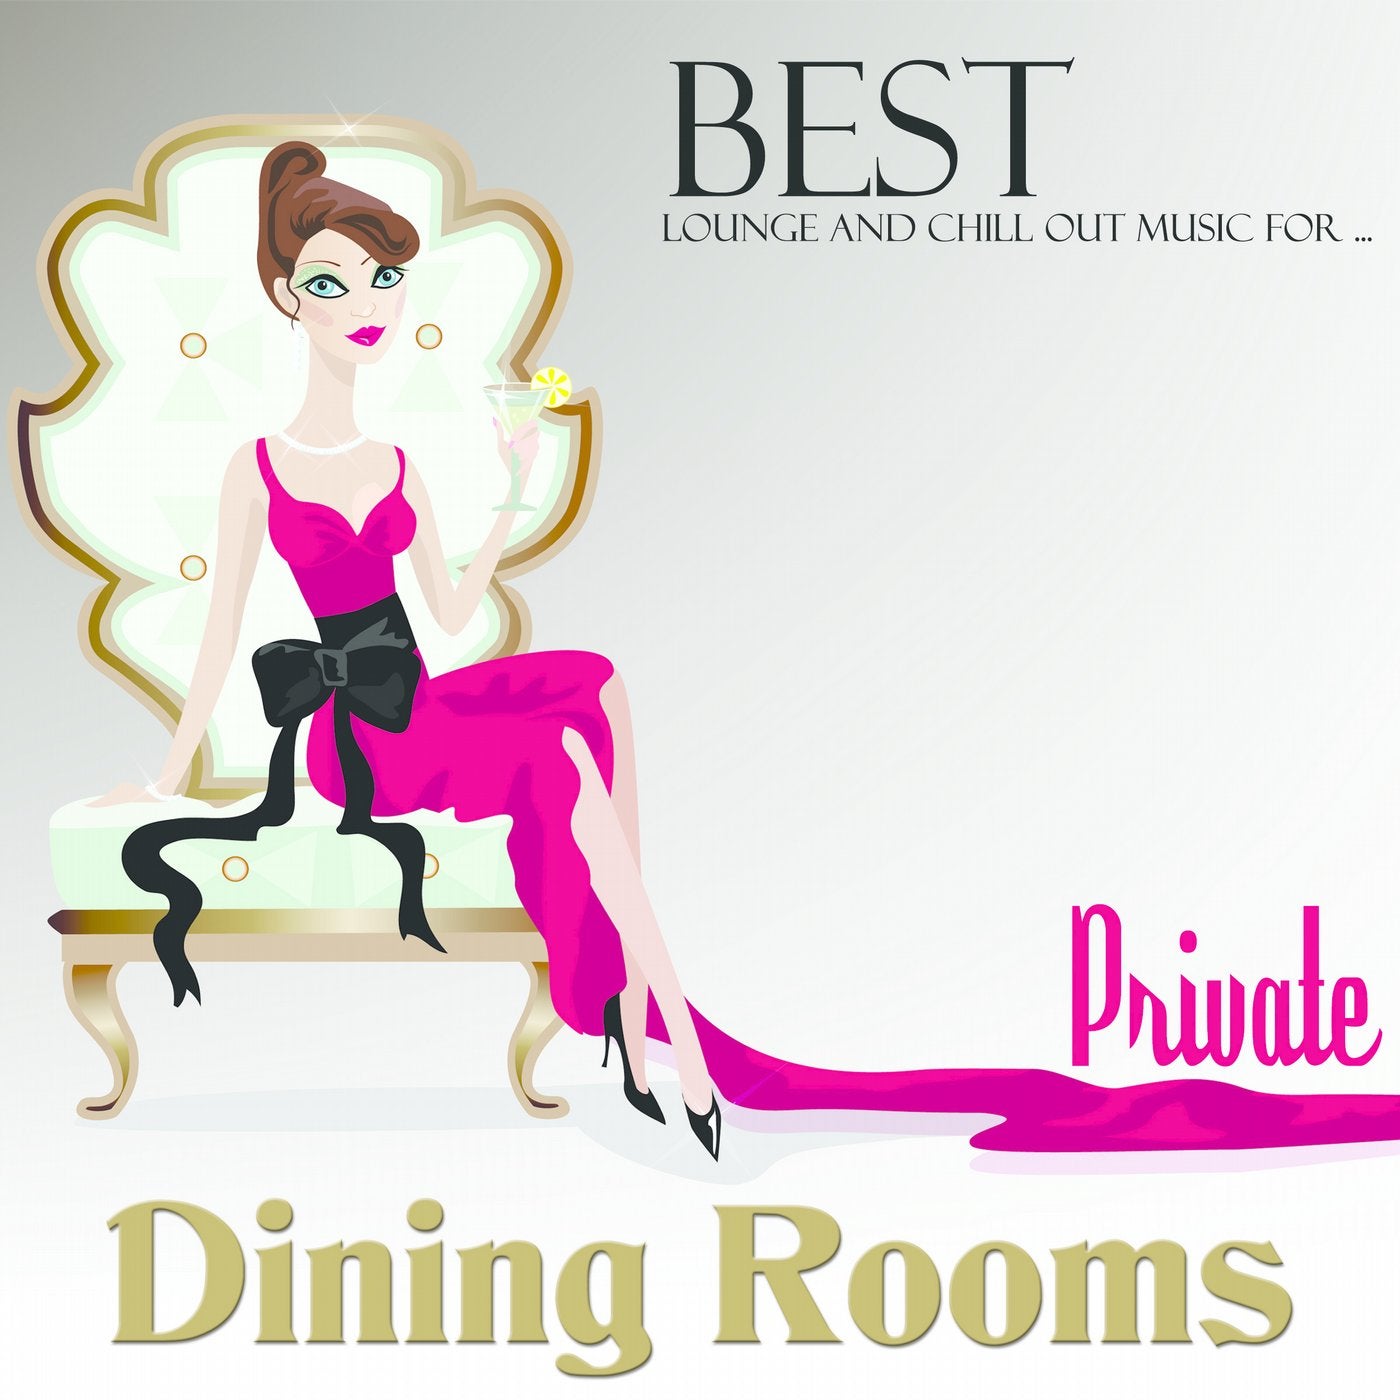 Best Lounge and Chillout Music for Private Dining Rooms